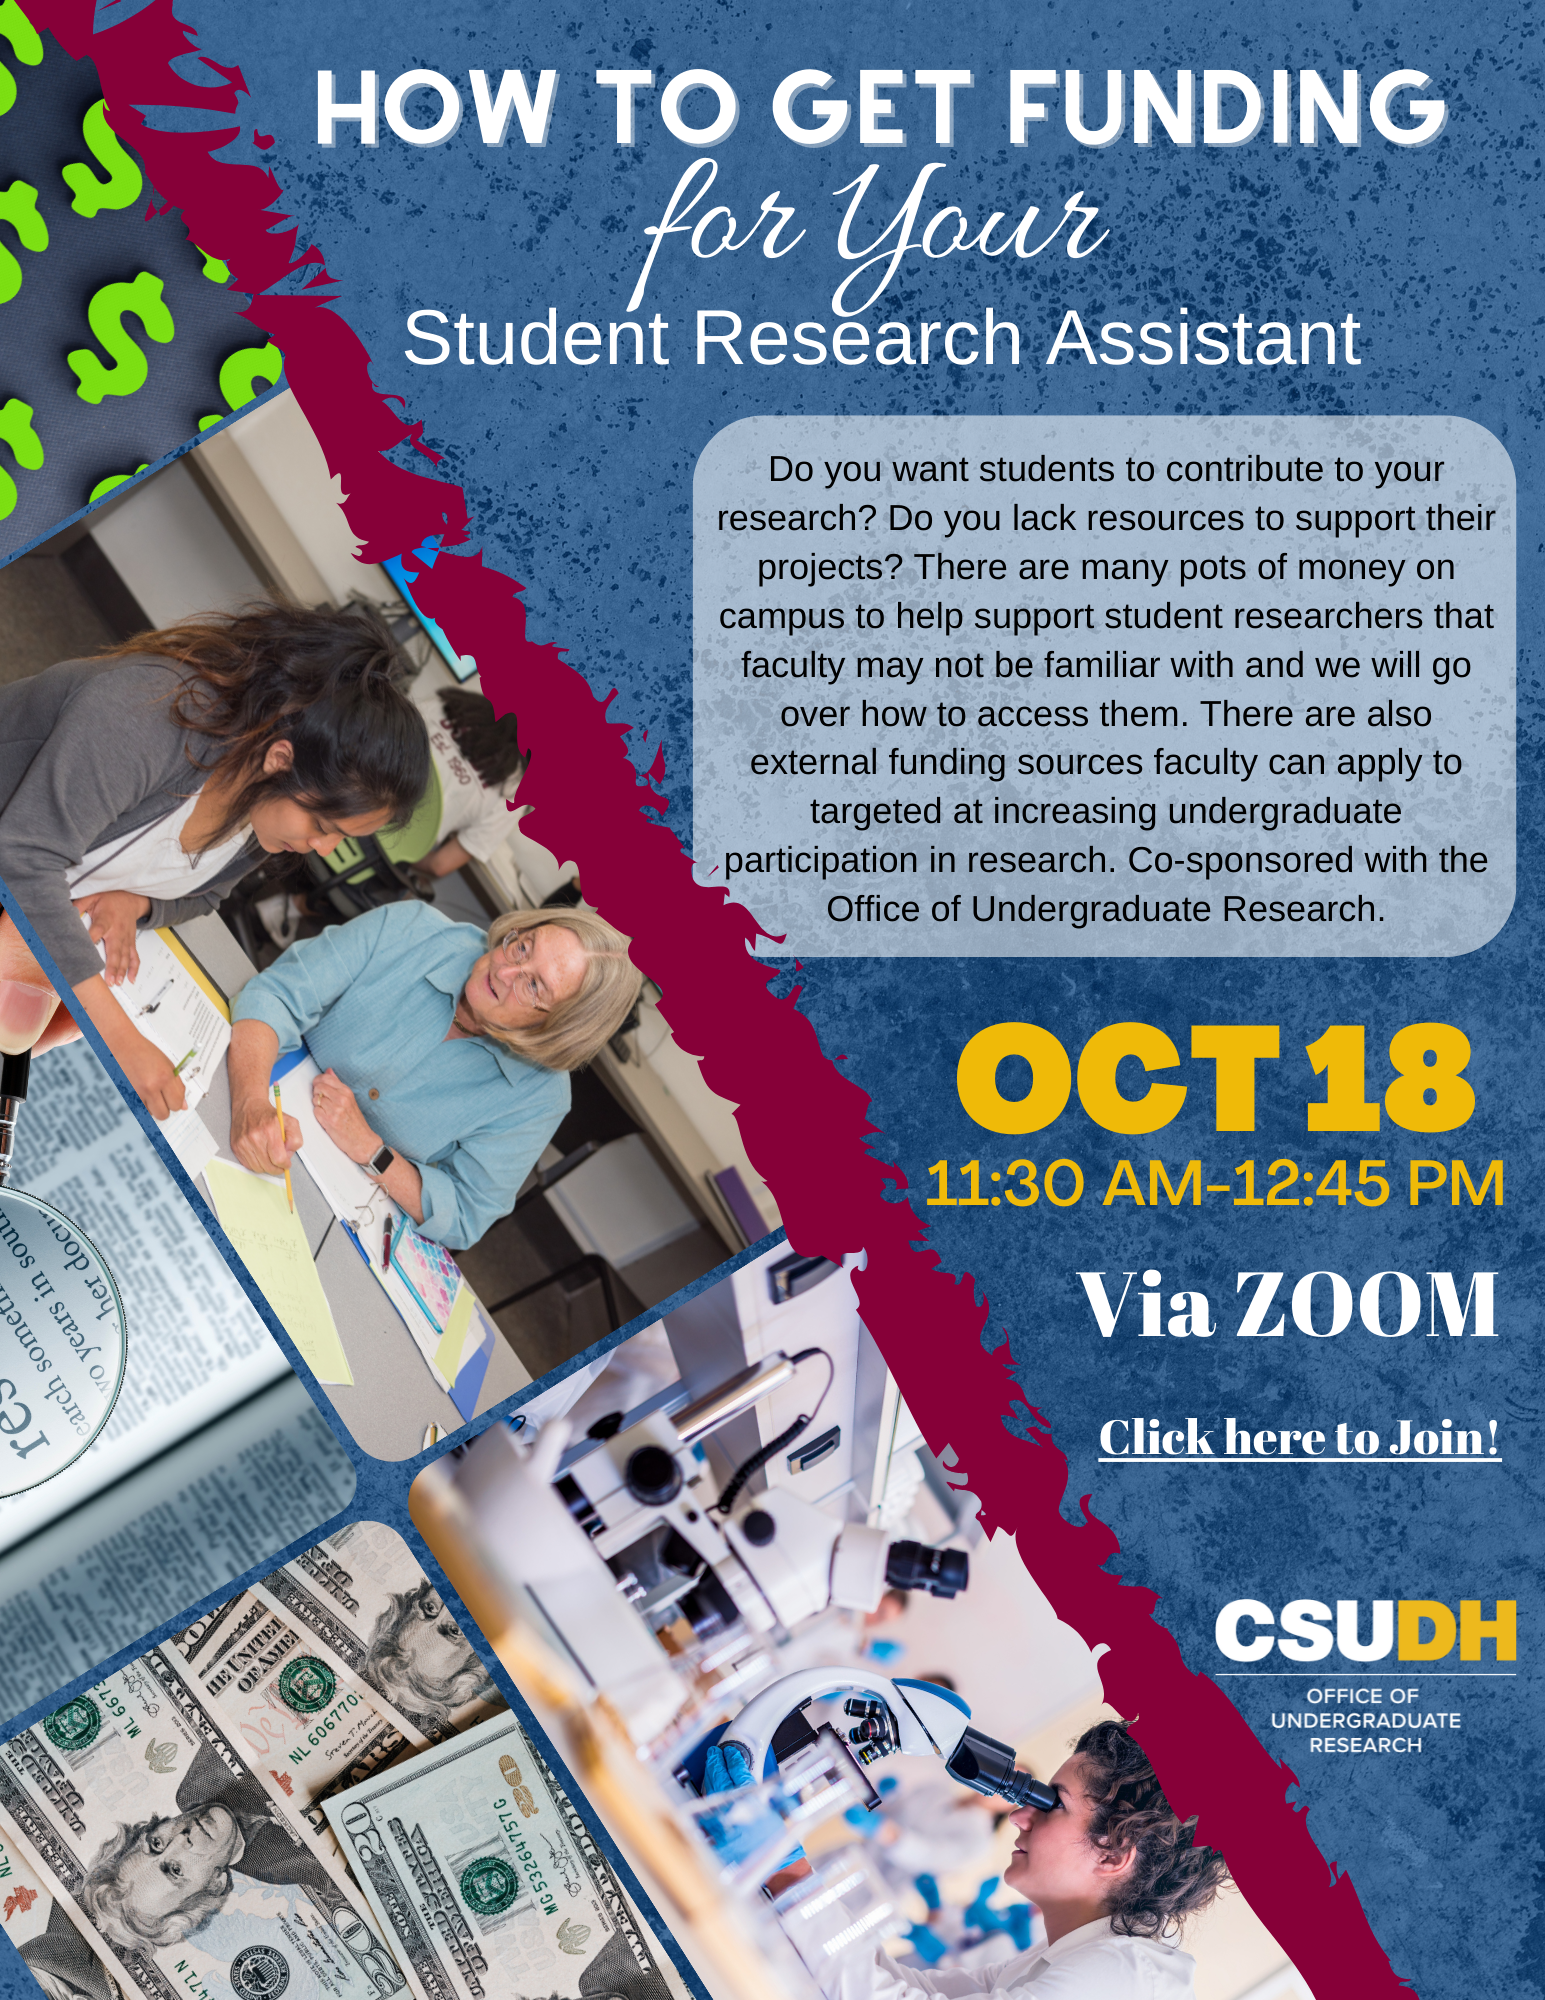 How-to-Get-Funding-for-Your-Student-Research-Assistant-10-18-22.png